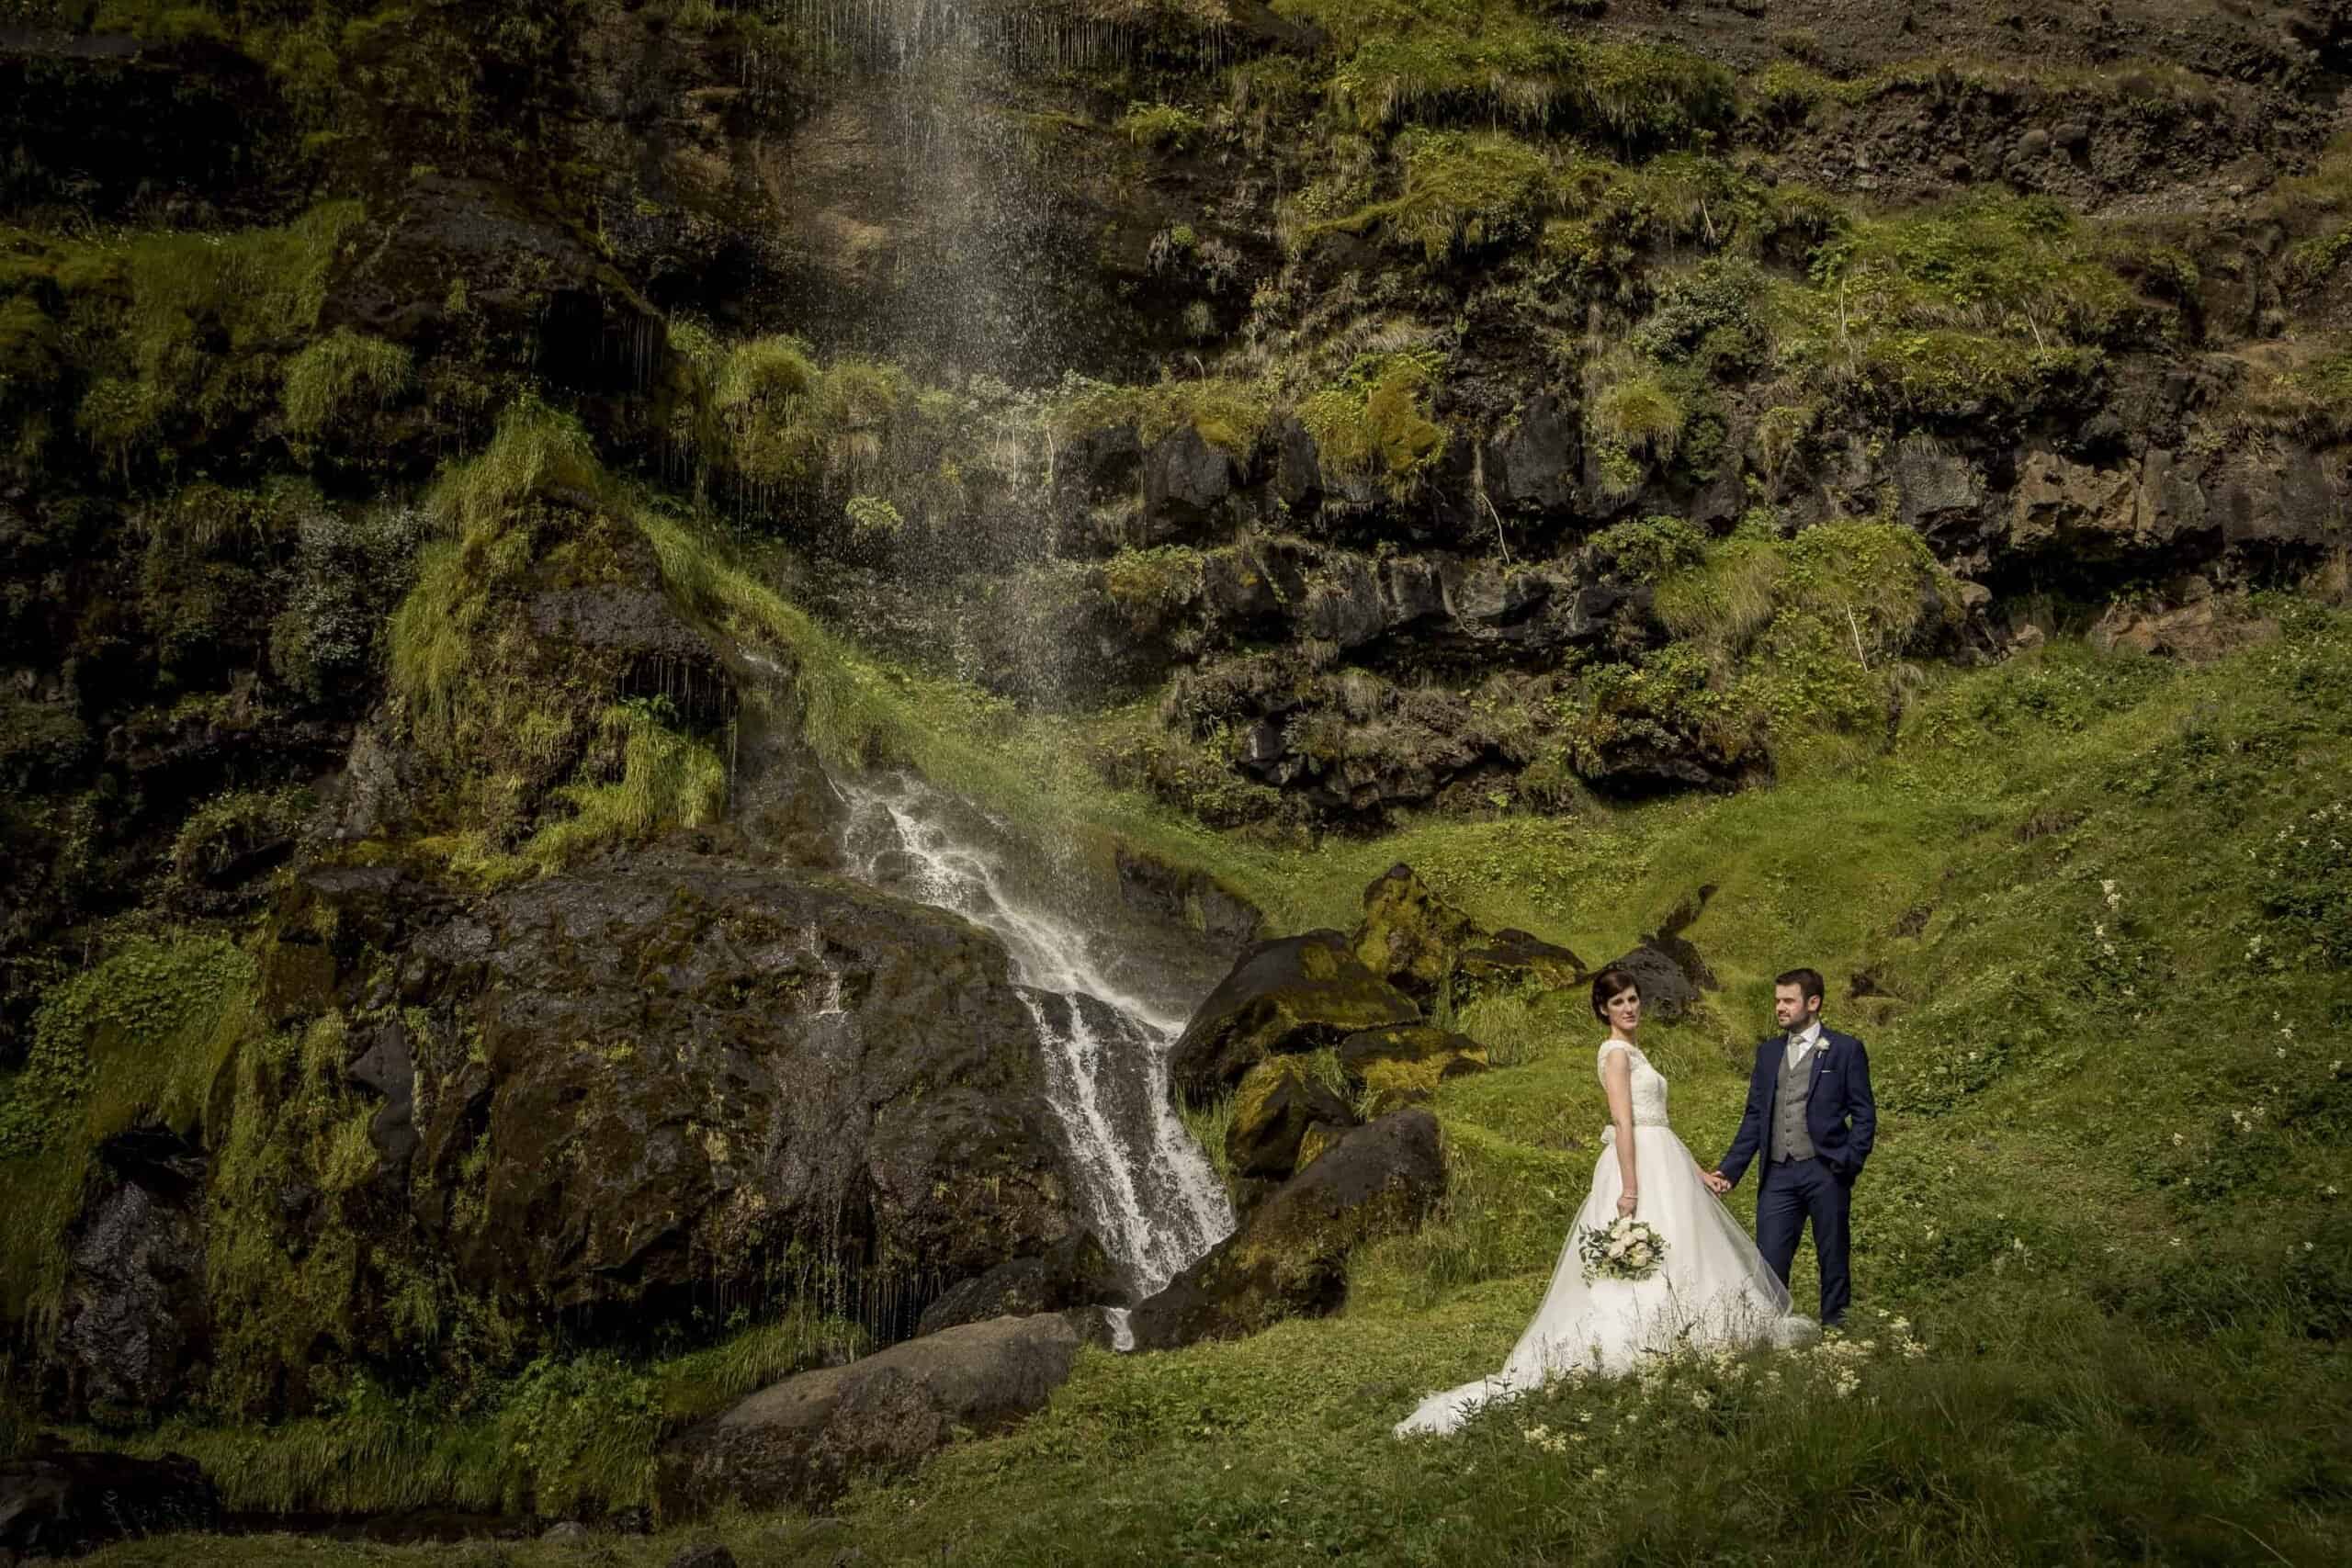 Bride wearing a white dress holds hands with her groom in front of the waterfall Þórðarfoss.